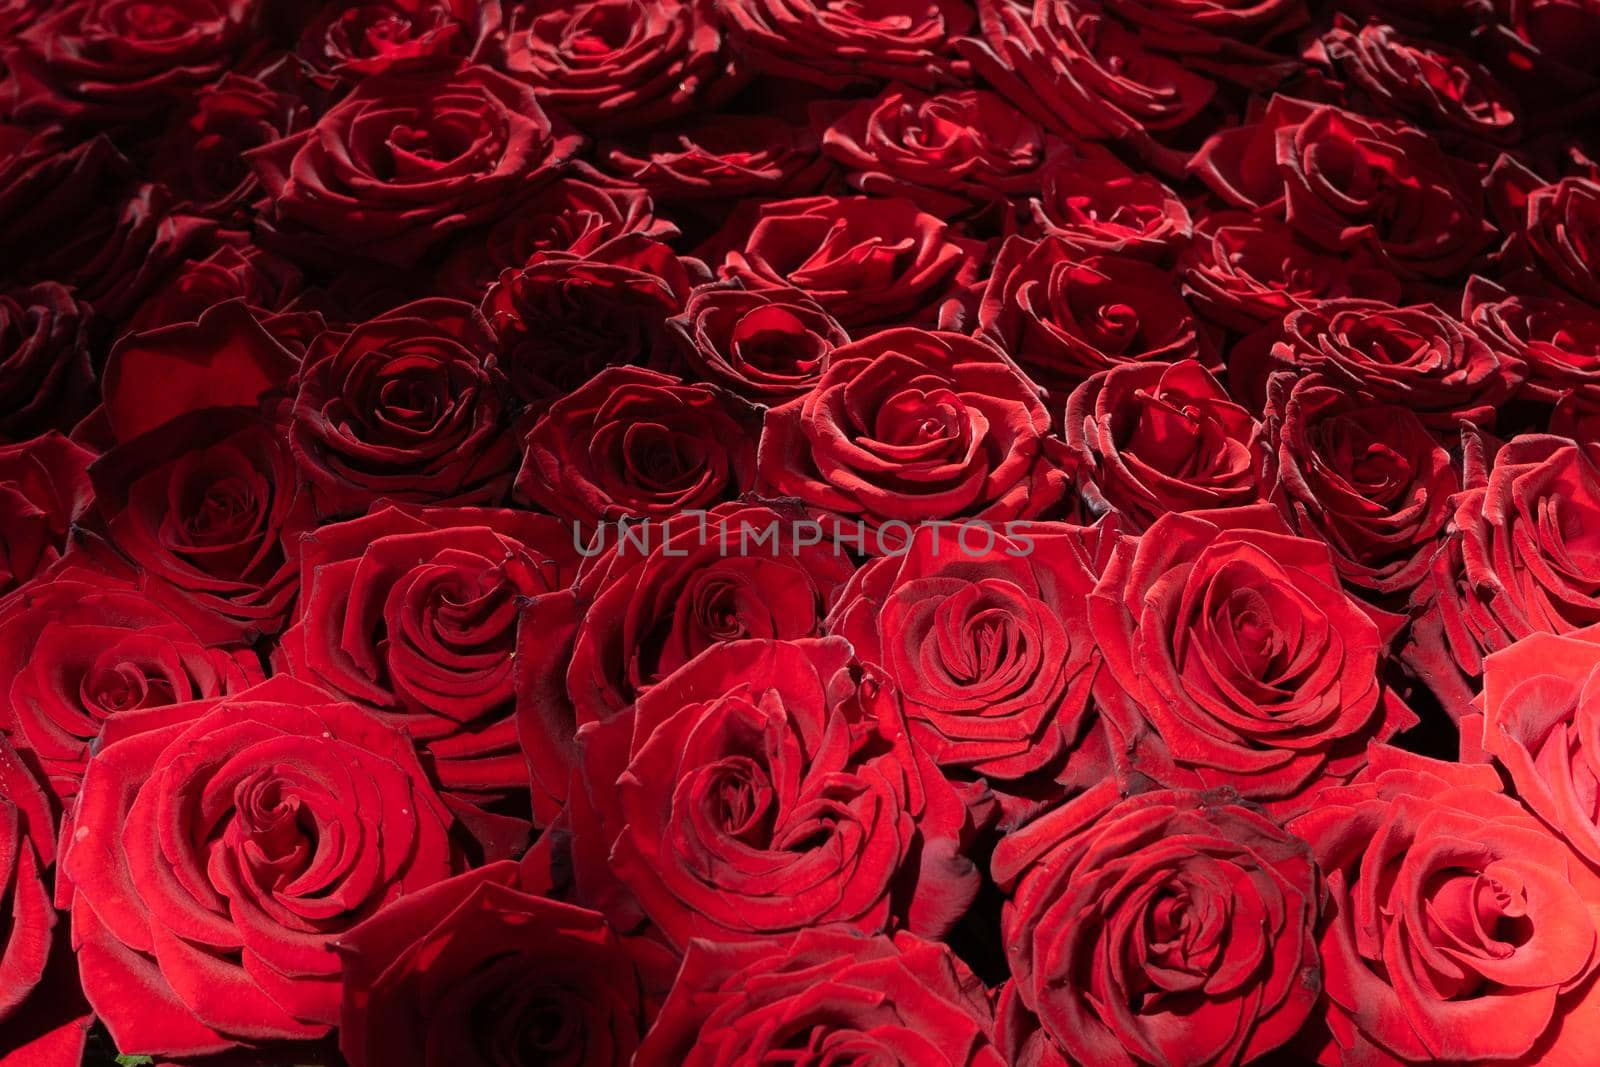 Many blooming red roses with romantic lighting.